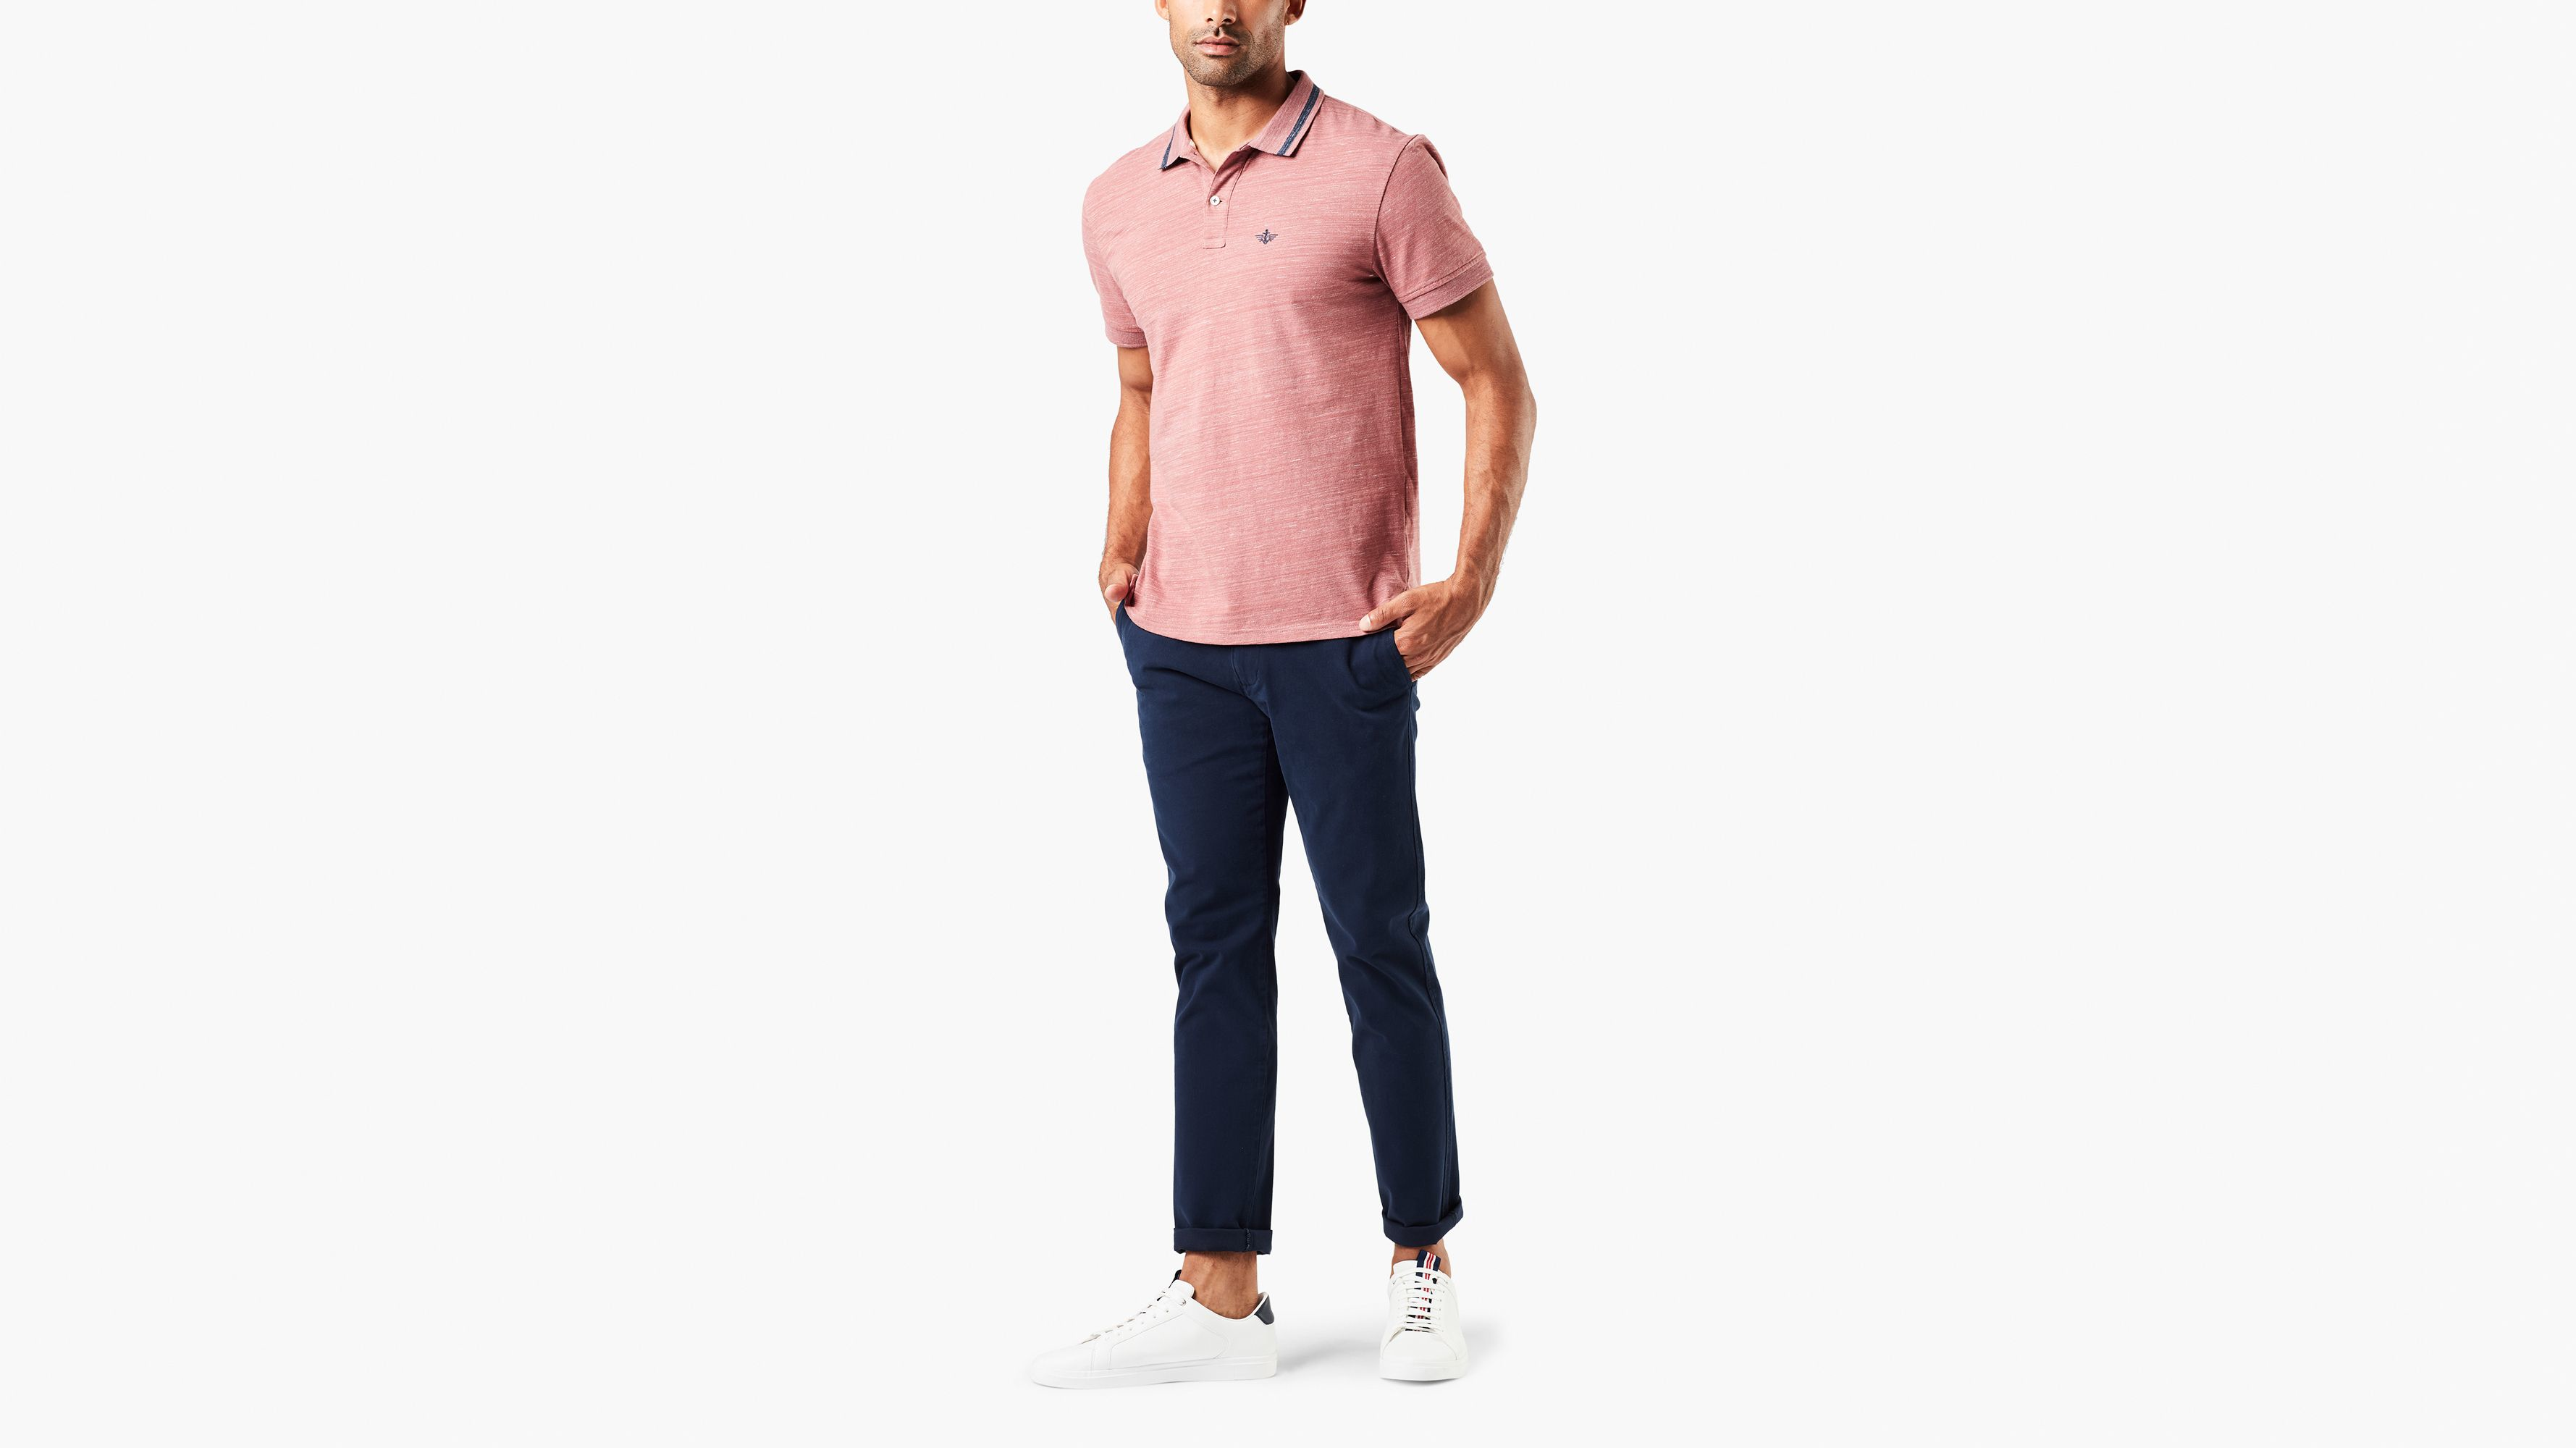 Ultimate Chinos, Skinny Fit – Dockers®